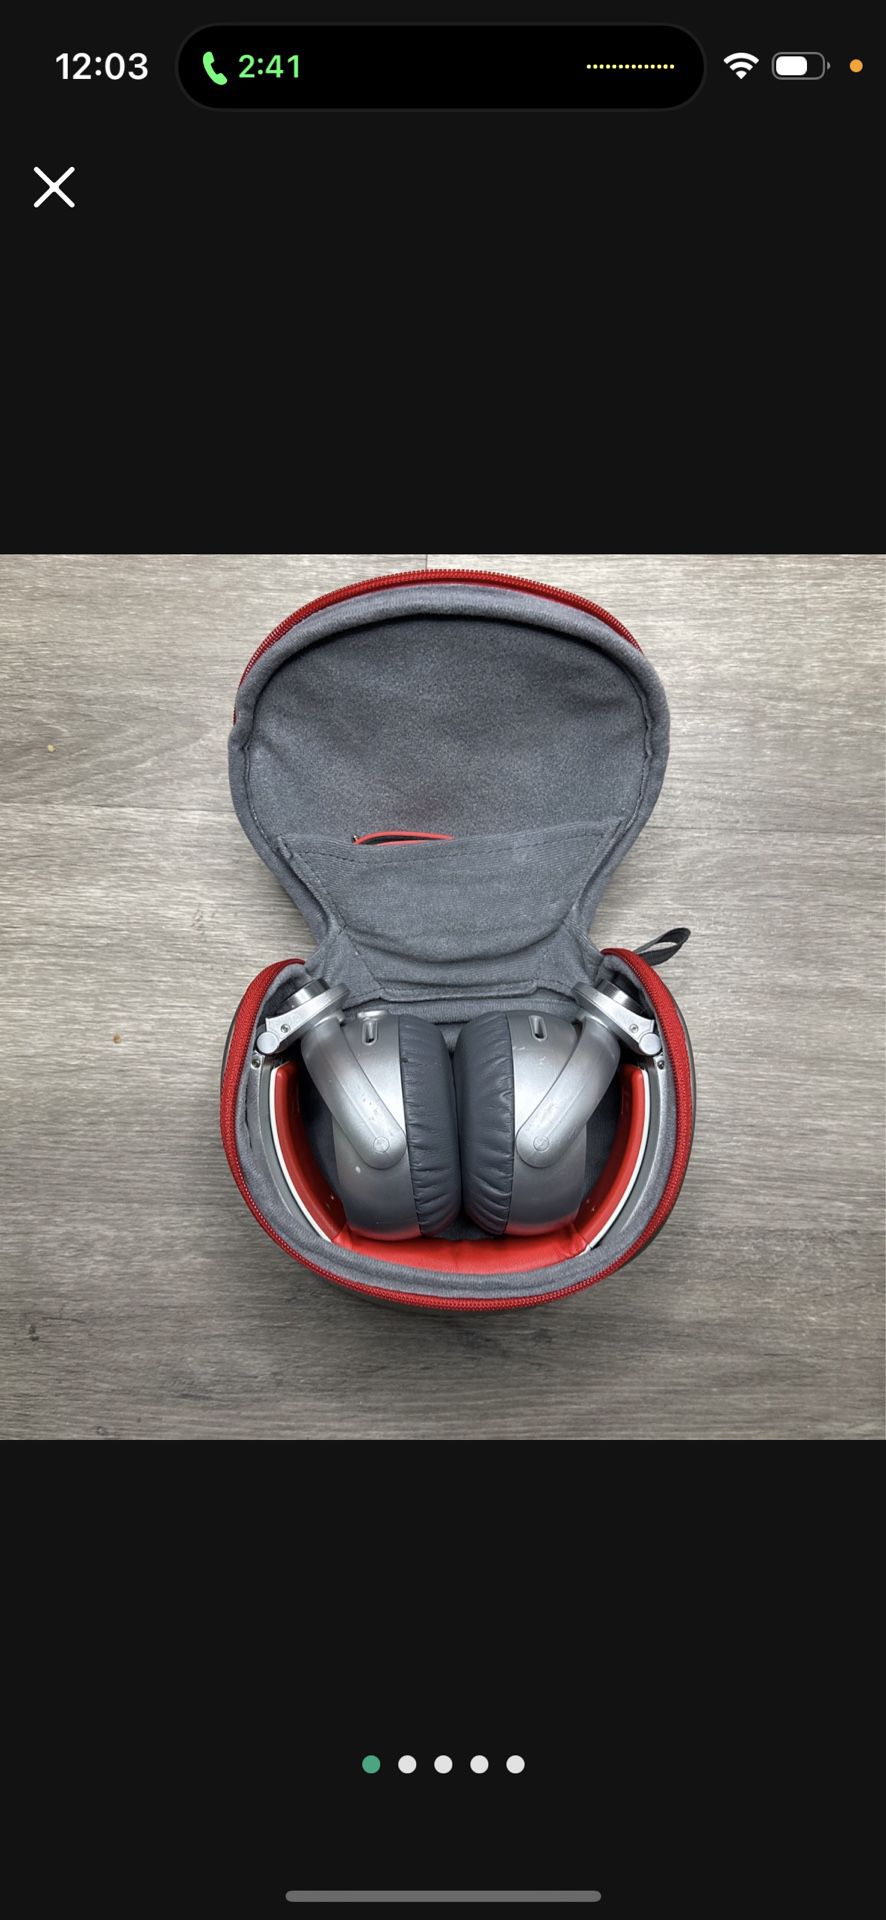 Sony MDR-X10 Headphones with Case